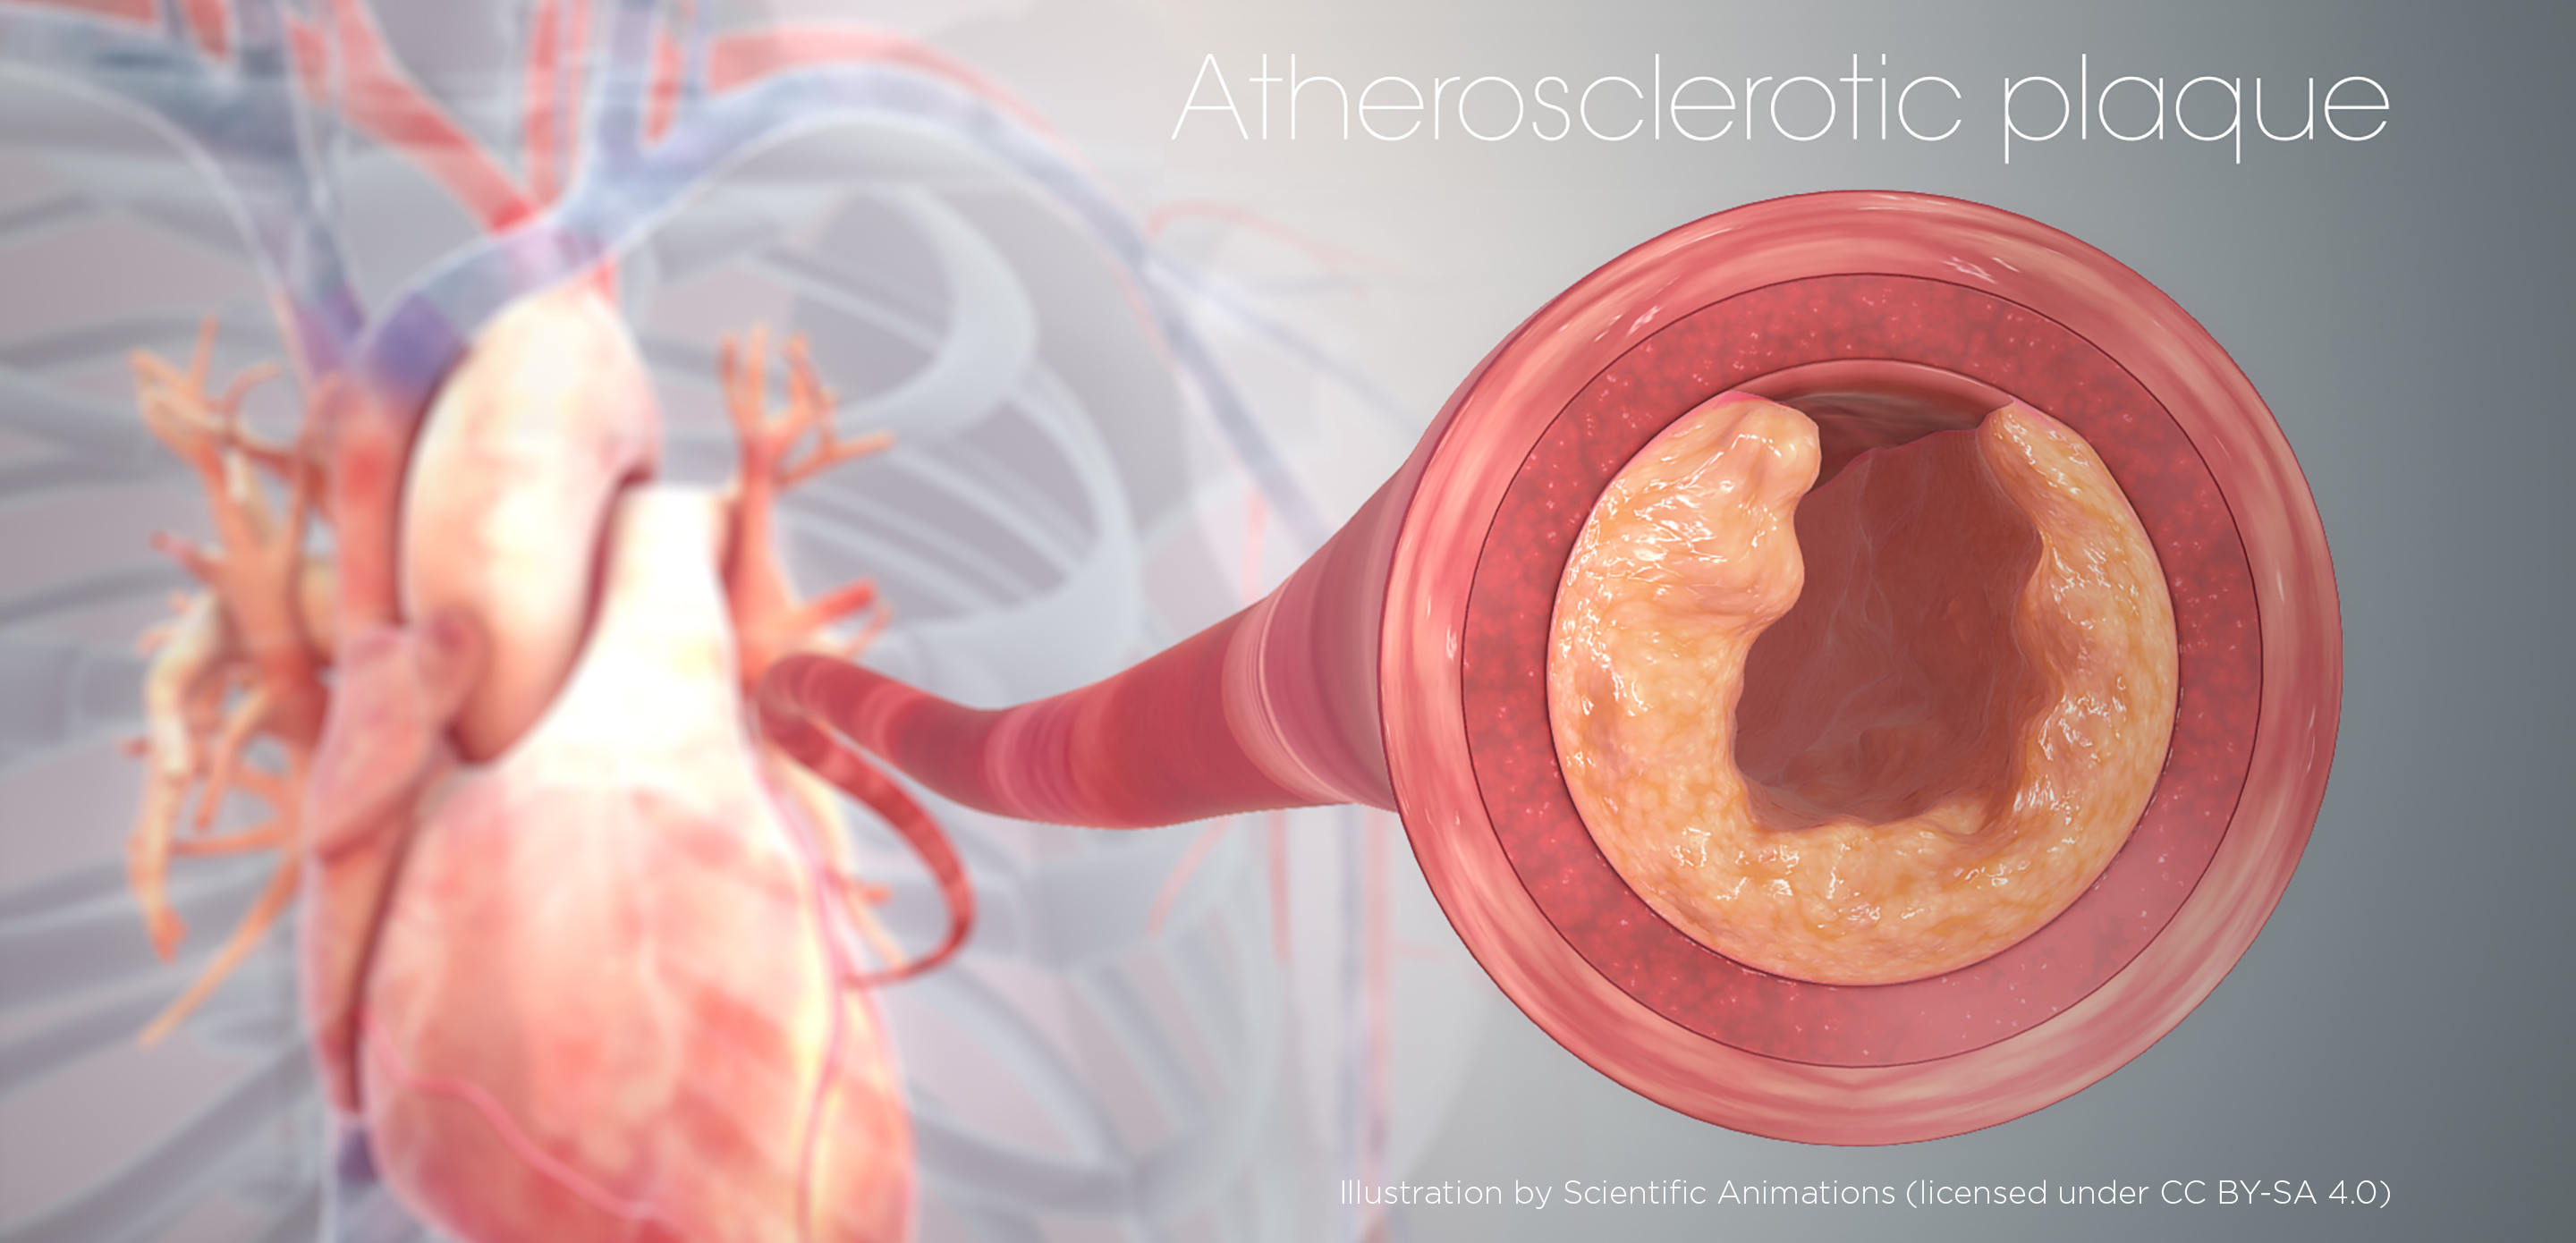 An illustration shows a red heart with the blue veins and red arteries of the circulatory system in the background. In the foreground, a zoomed-in view shows an artery with buildup inside, known as an atherosclerotic plaque, in a pinkish orange color.